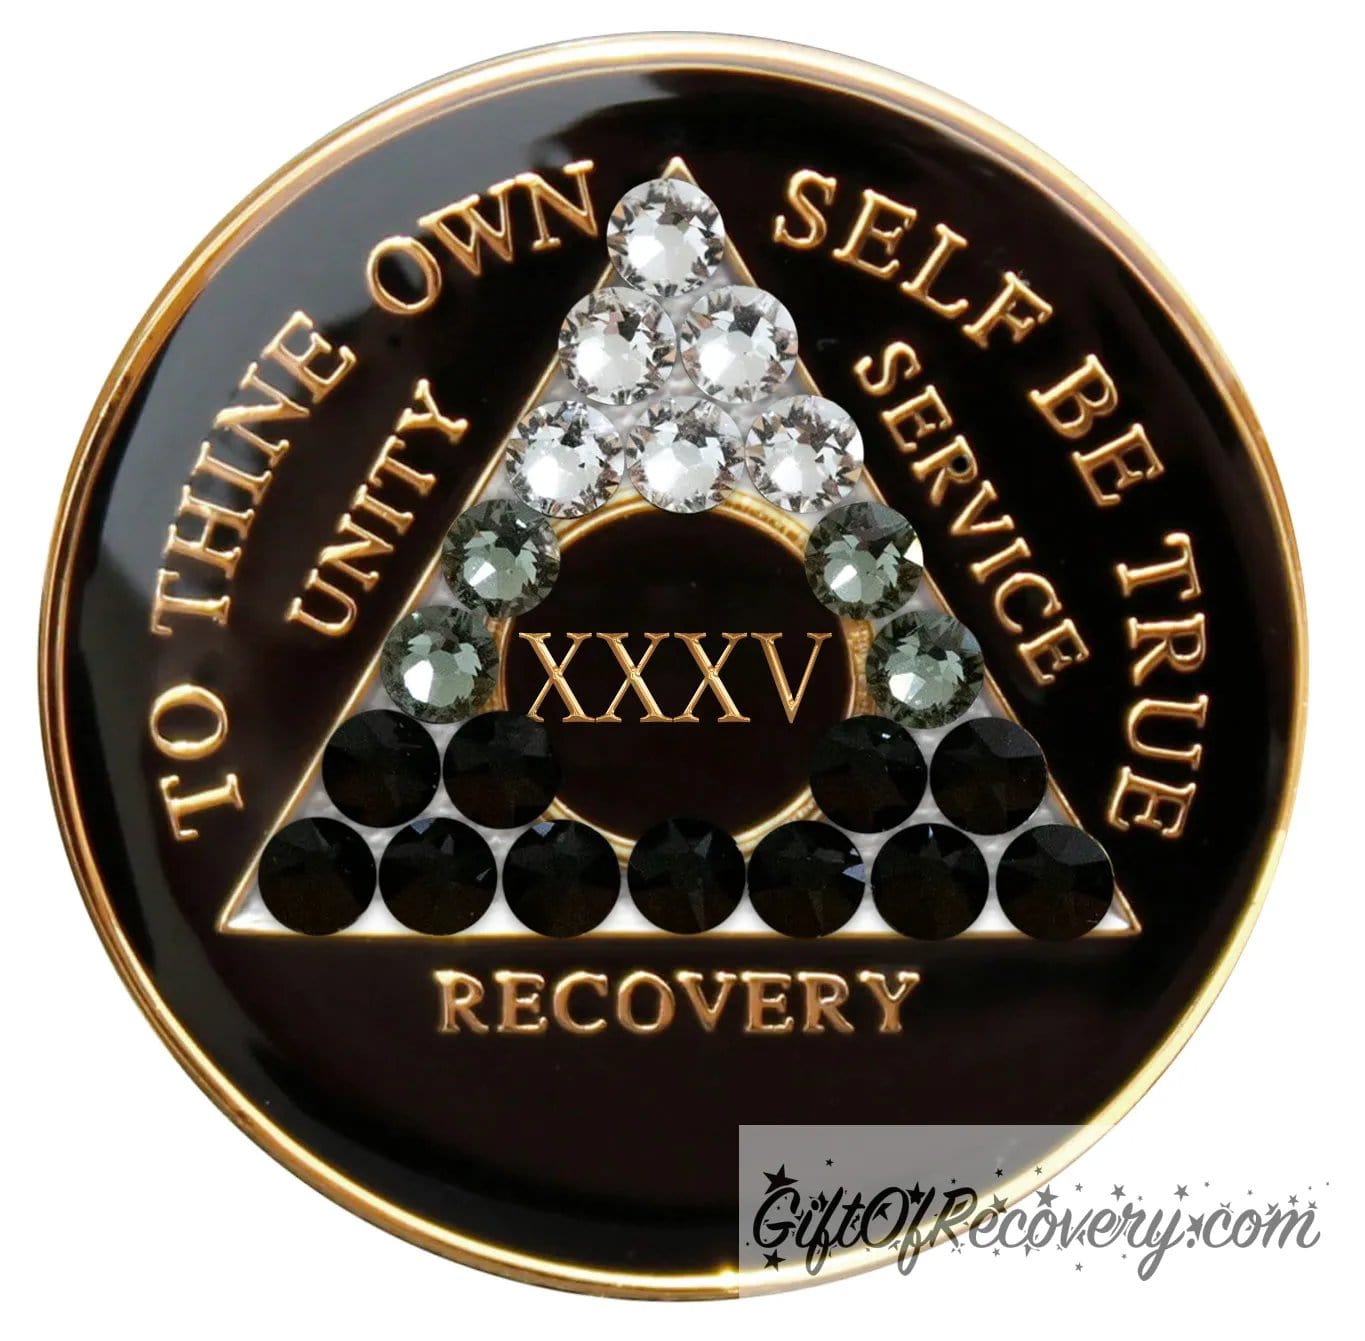 35 year AA recovery medallion black onyx with 21 genuine crystals ranging from clear to grey, to black, representing the transformation of the recovery journey, the AA moto along with unity, service, recovery, roman numeral, and the outer rim of medallion are embossed with 14k gold plated bras, the medallion is sealed in resin for a glossy finish.